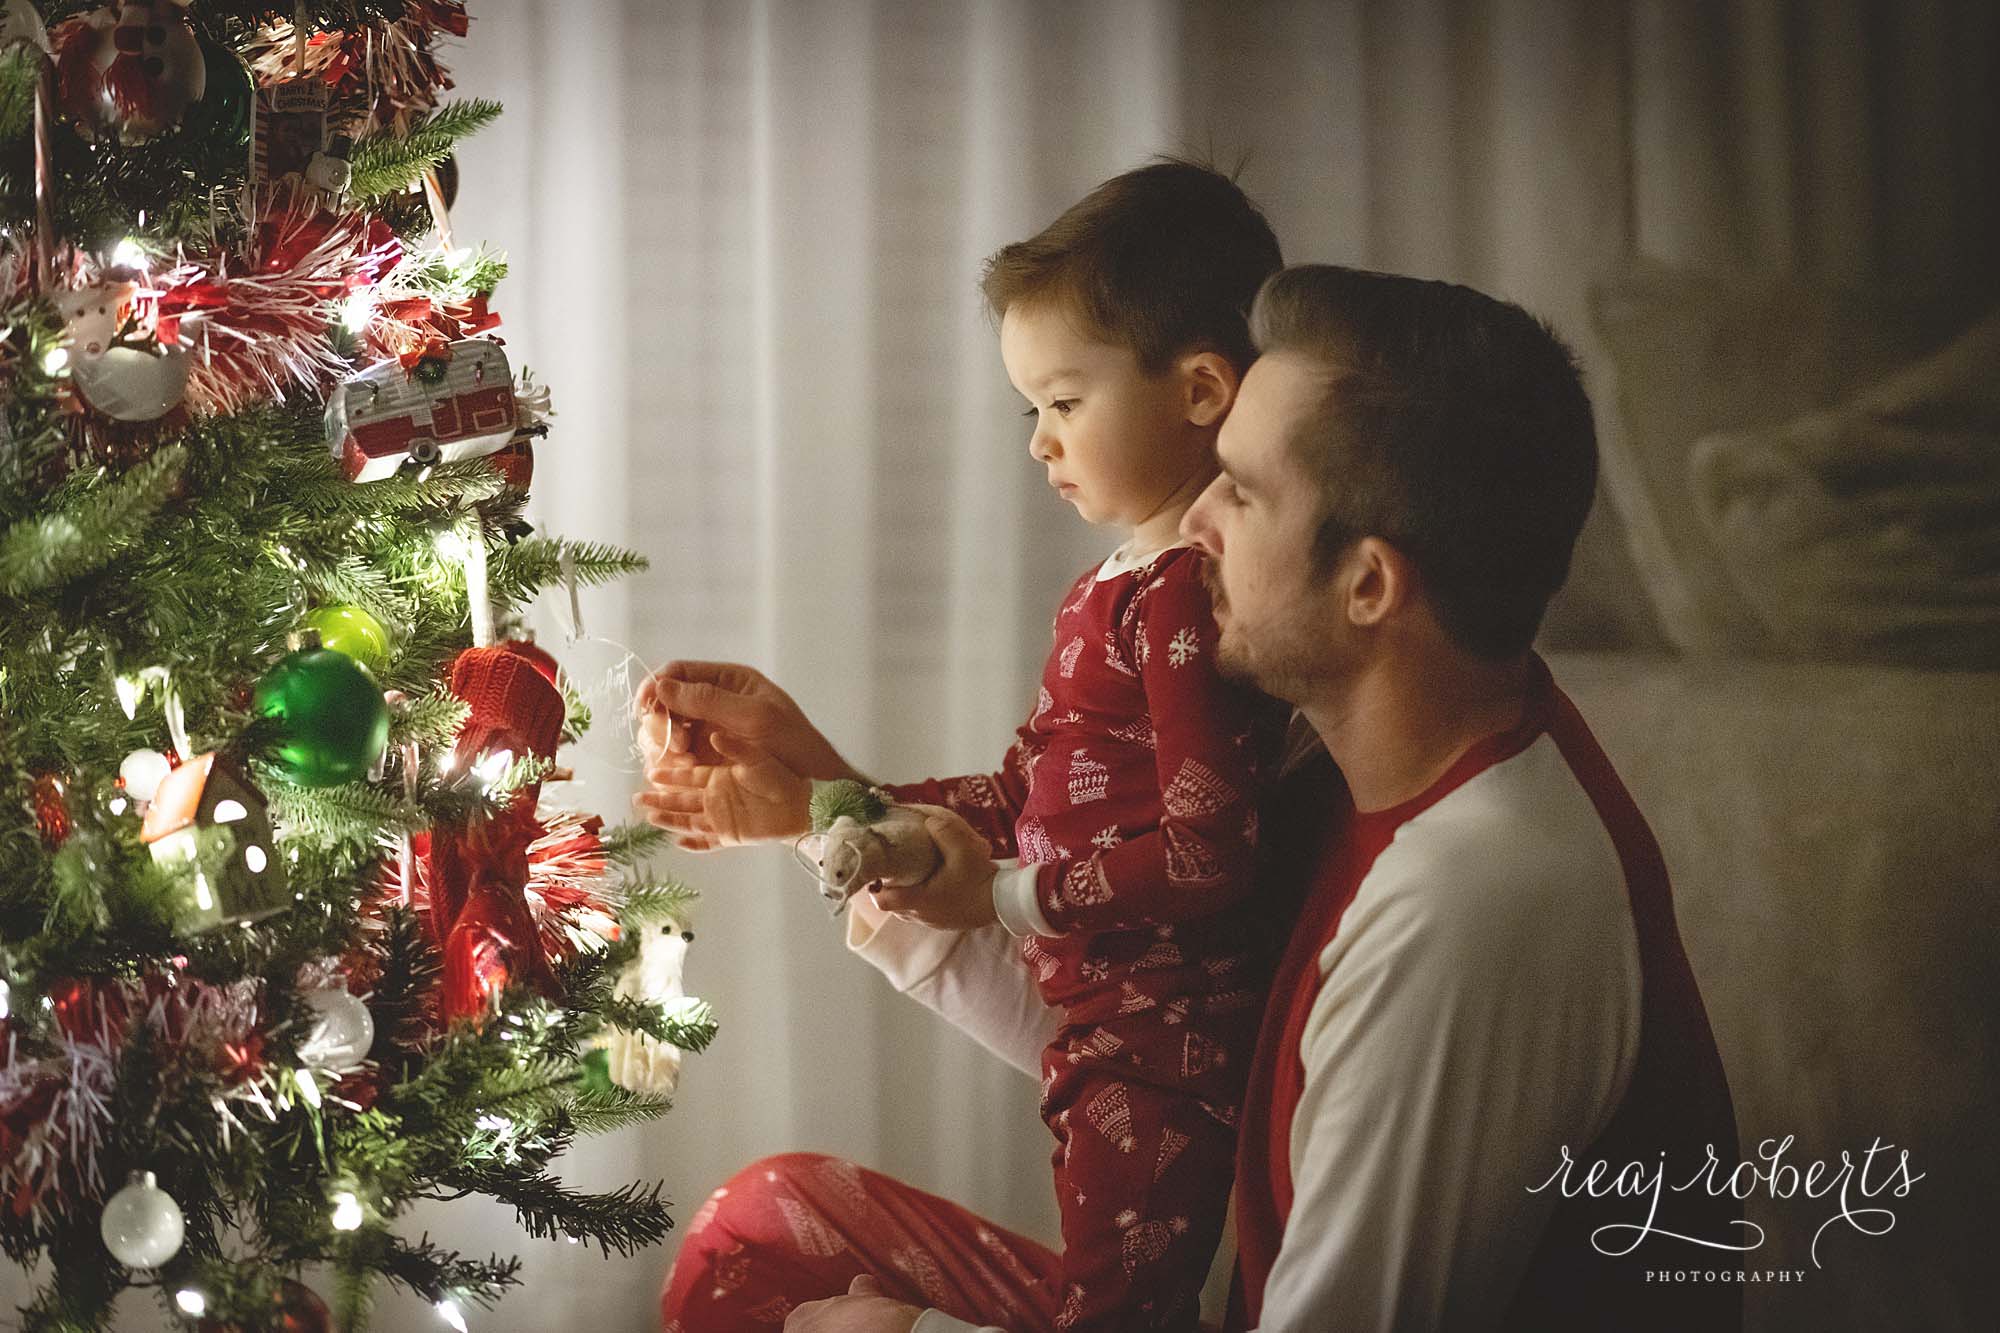 Father and son Christmas tree photos | Simply Sparkle Sessions by Reaj Roberts Photography